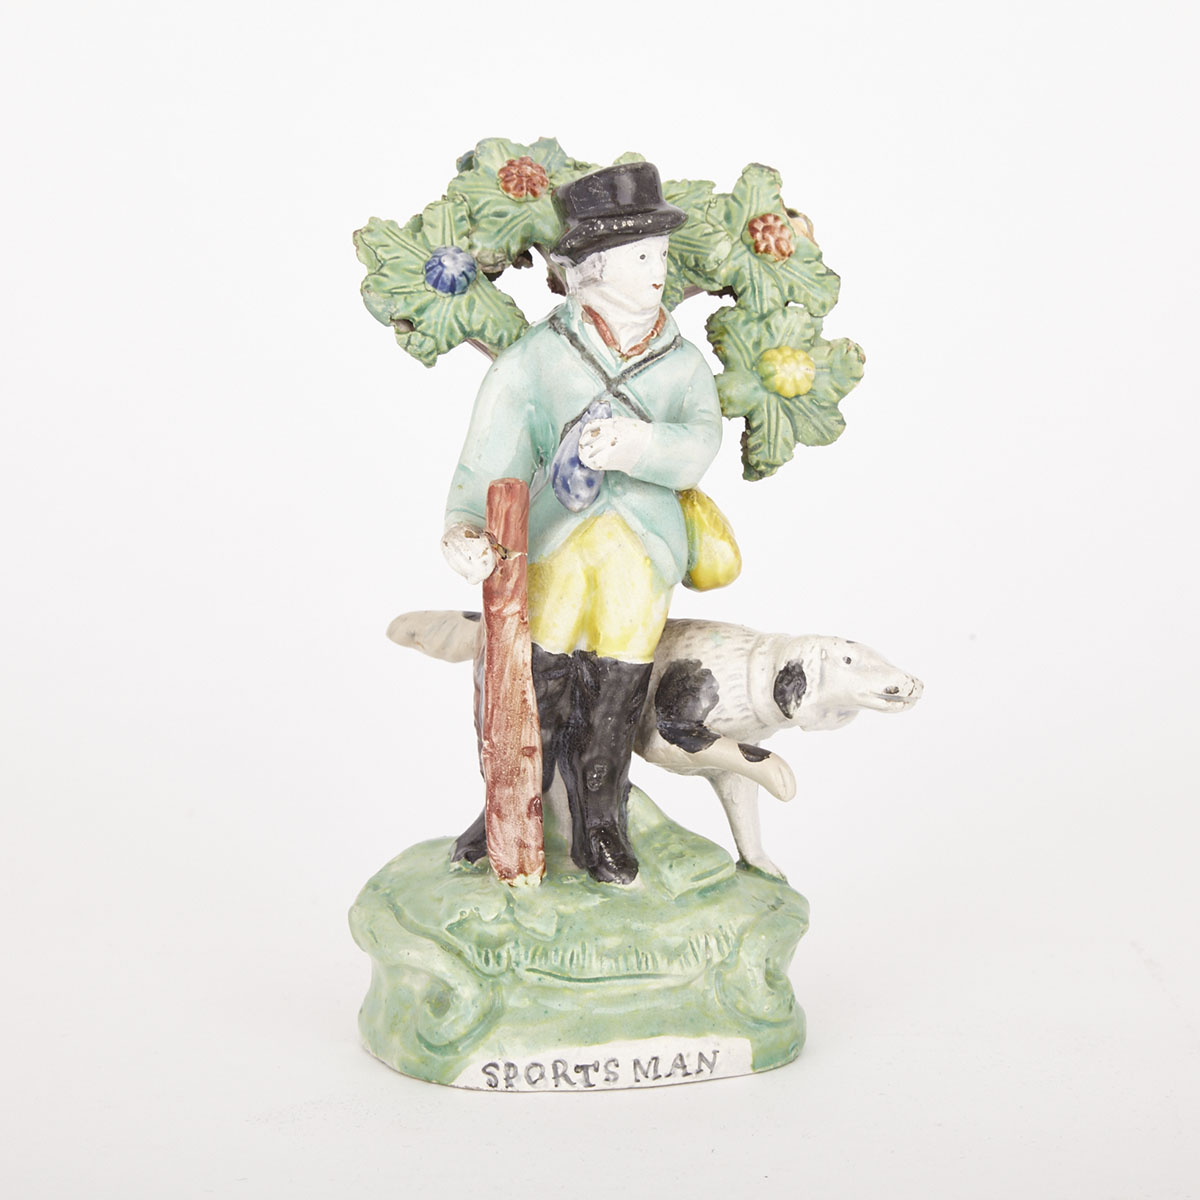 Staffordshire Pearlware Bocage Figure of a Sportsman, c.1820